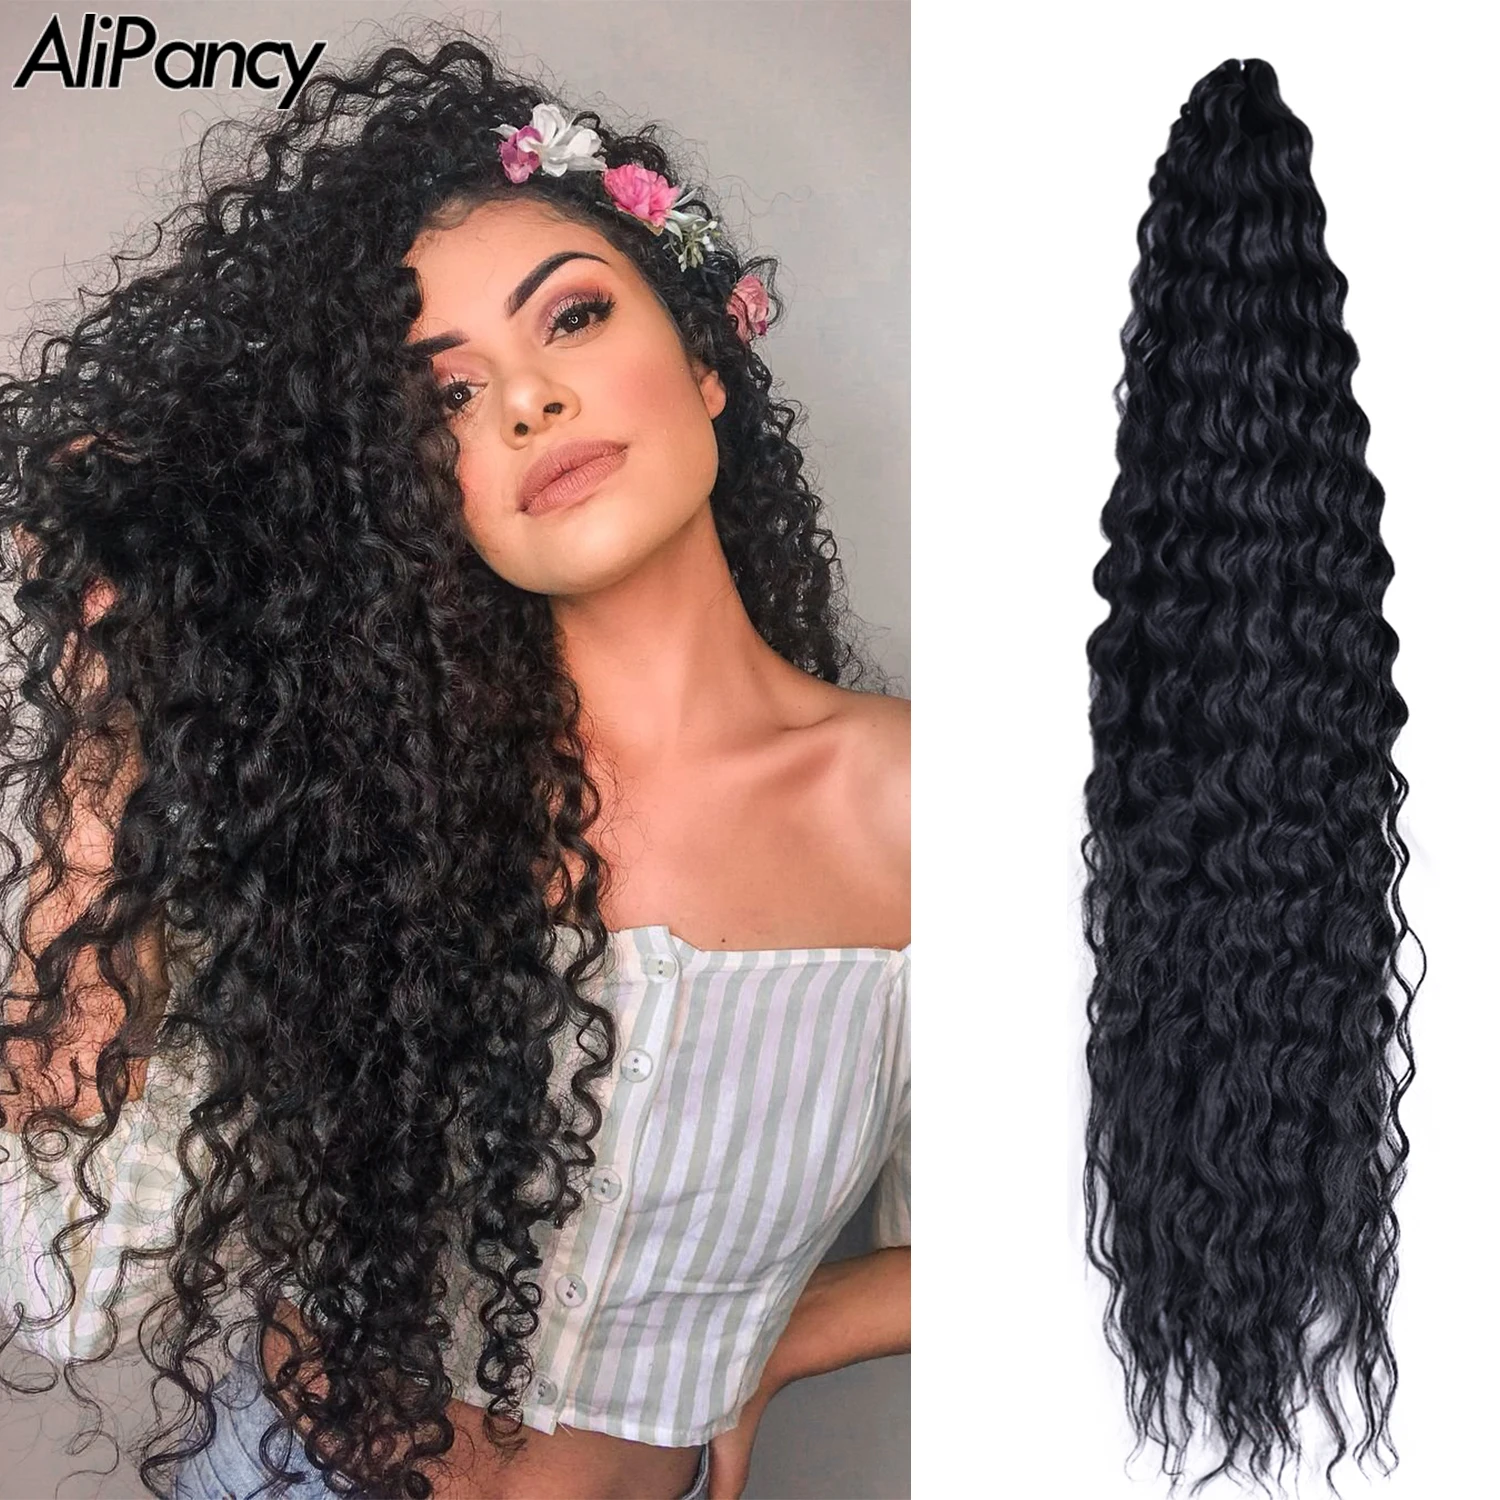 

30inch Ariel Crochet Braiding Hair Synthetic Extensions Curly Wavy Twist Hair Water Wave Ombre Brown Braids For Afro Women